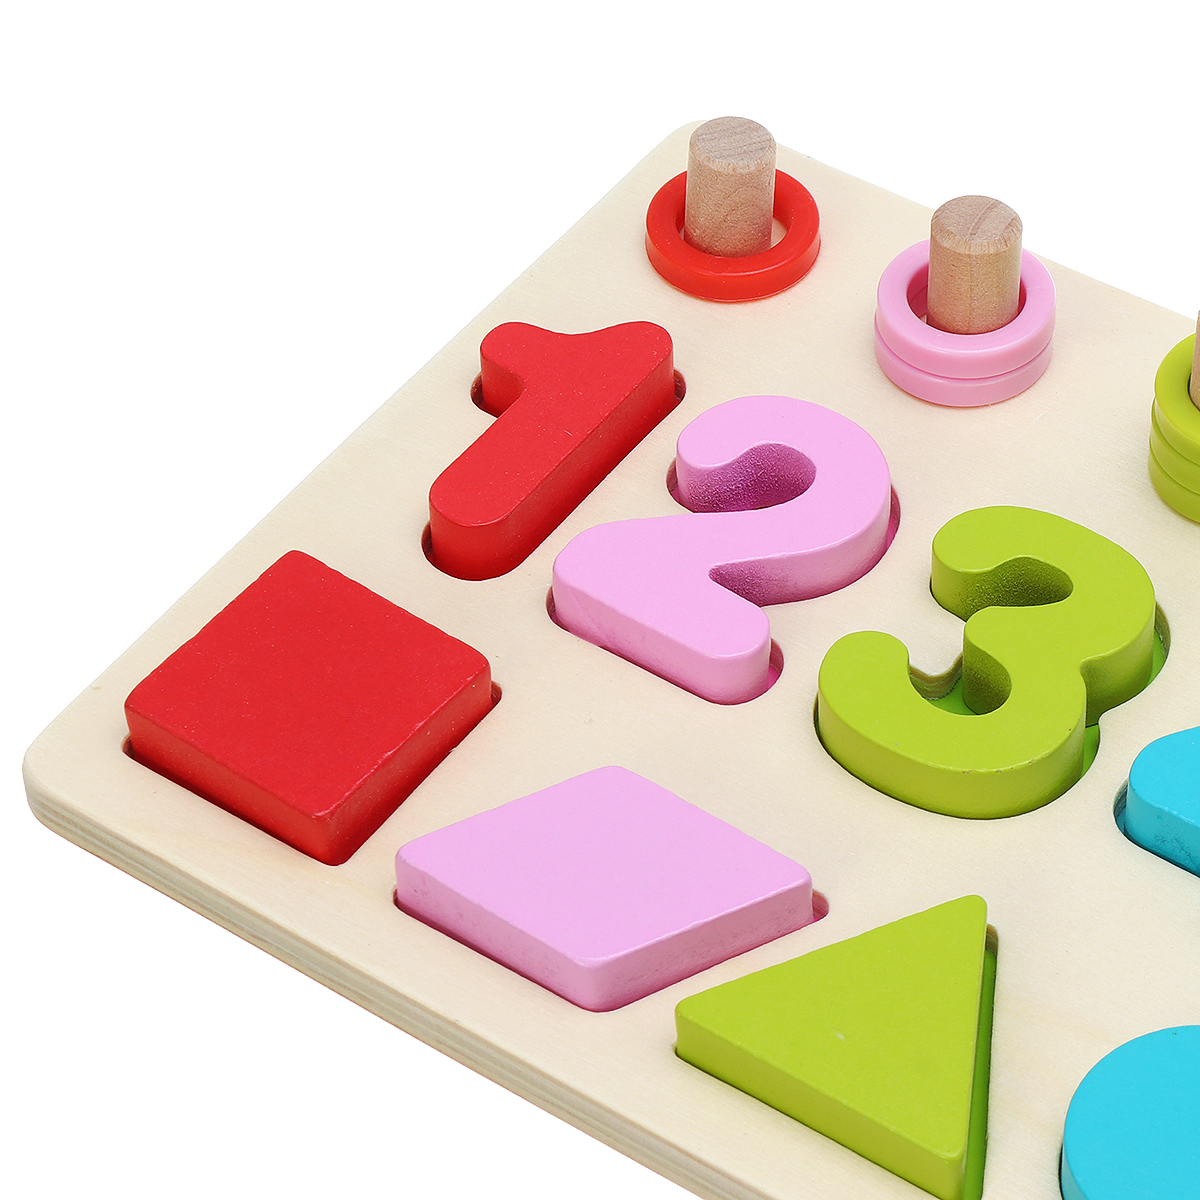 Kids-Wooden-Math-Puzzle-Toys-Numbers-Learning-Hand-Eye-Coordination-Educational-Games-1665813-10